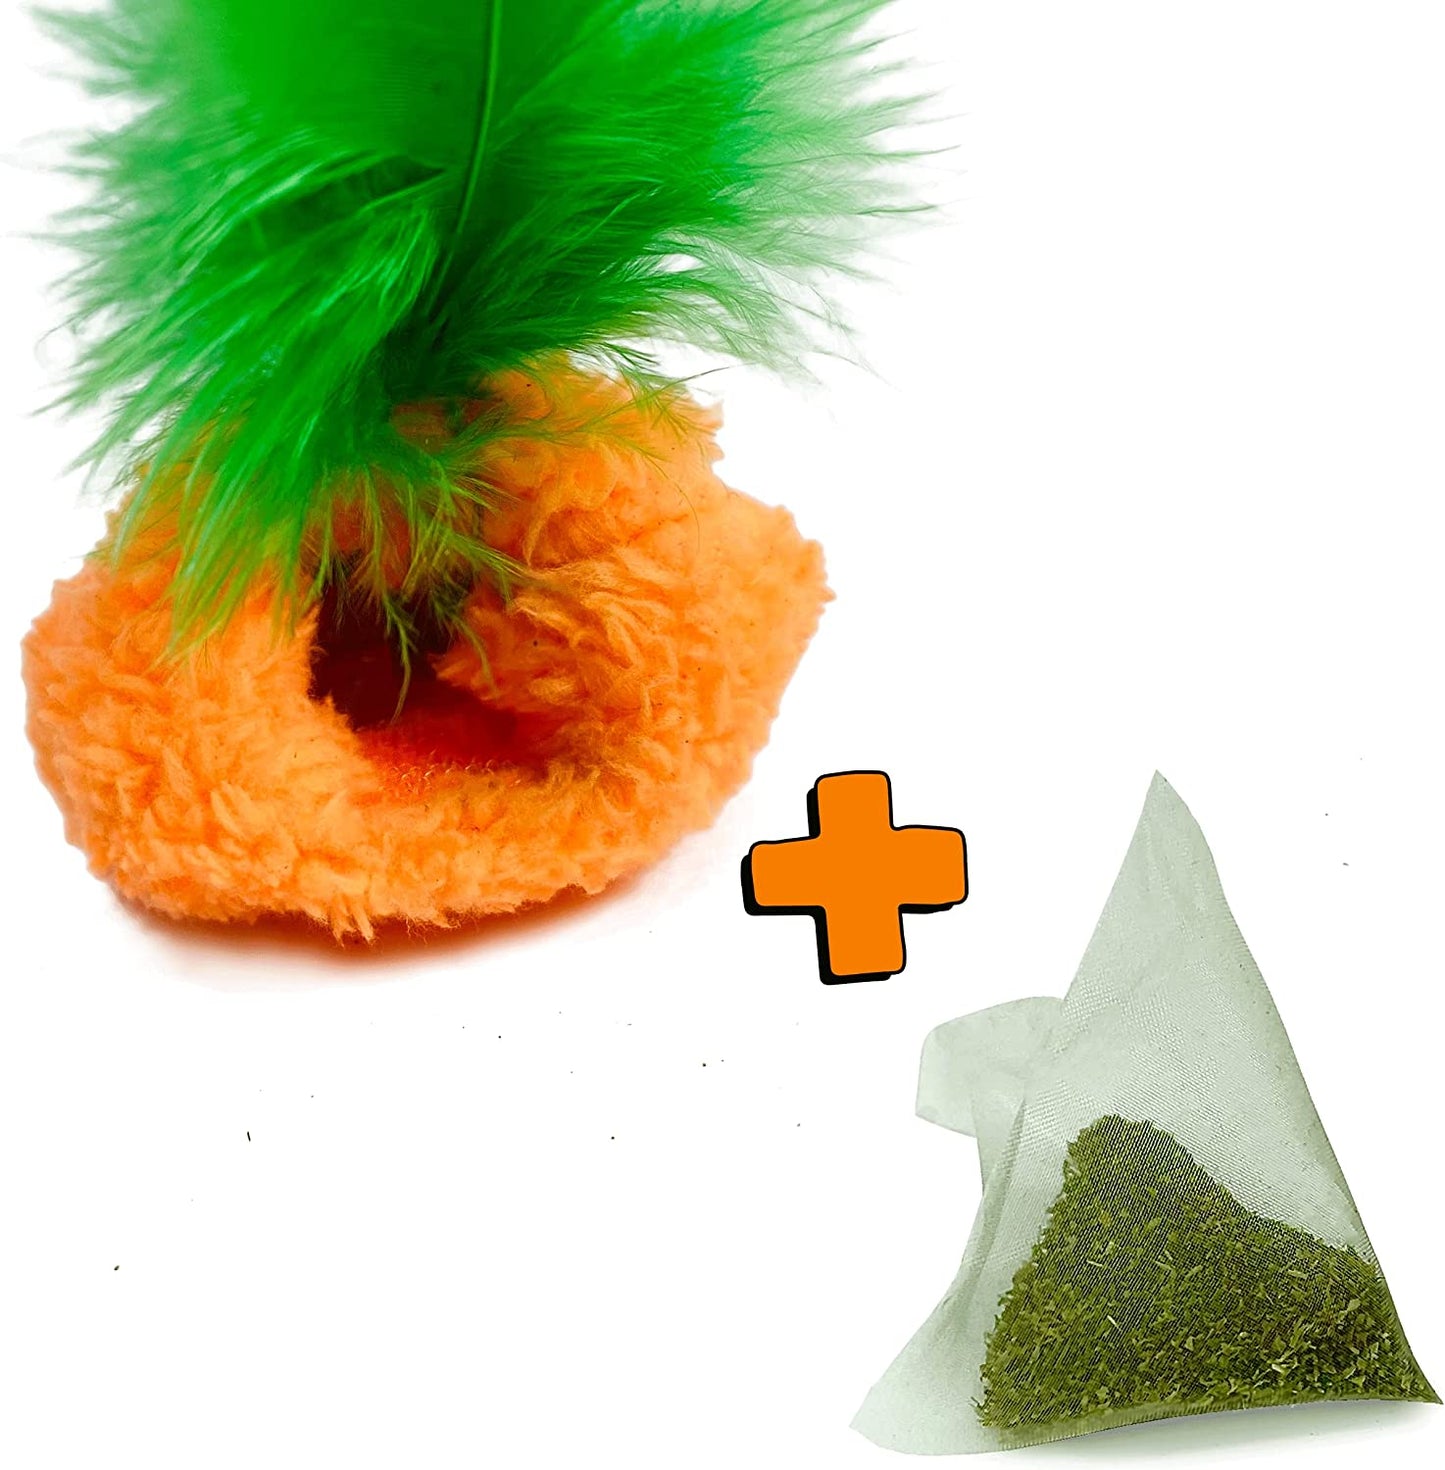 MyMeow - Krazy Carrot Refillable Cat Toy with 10 North American Natural Catnip Refill Bags